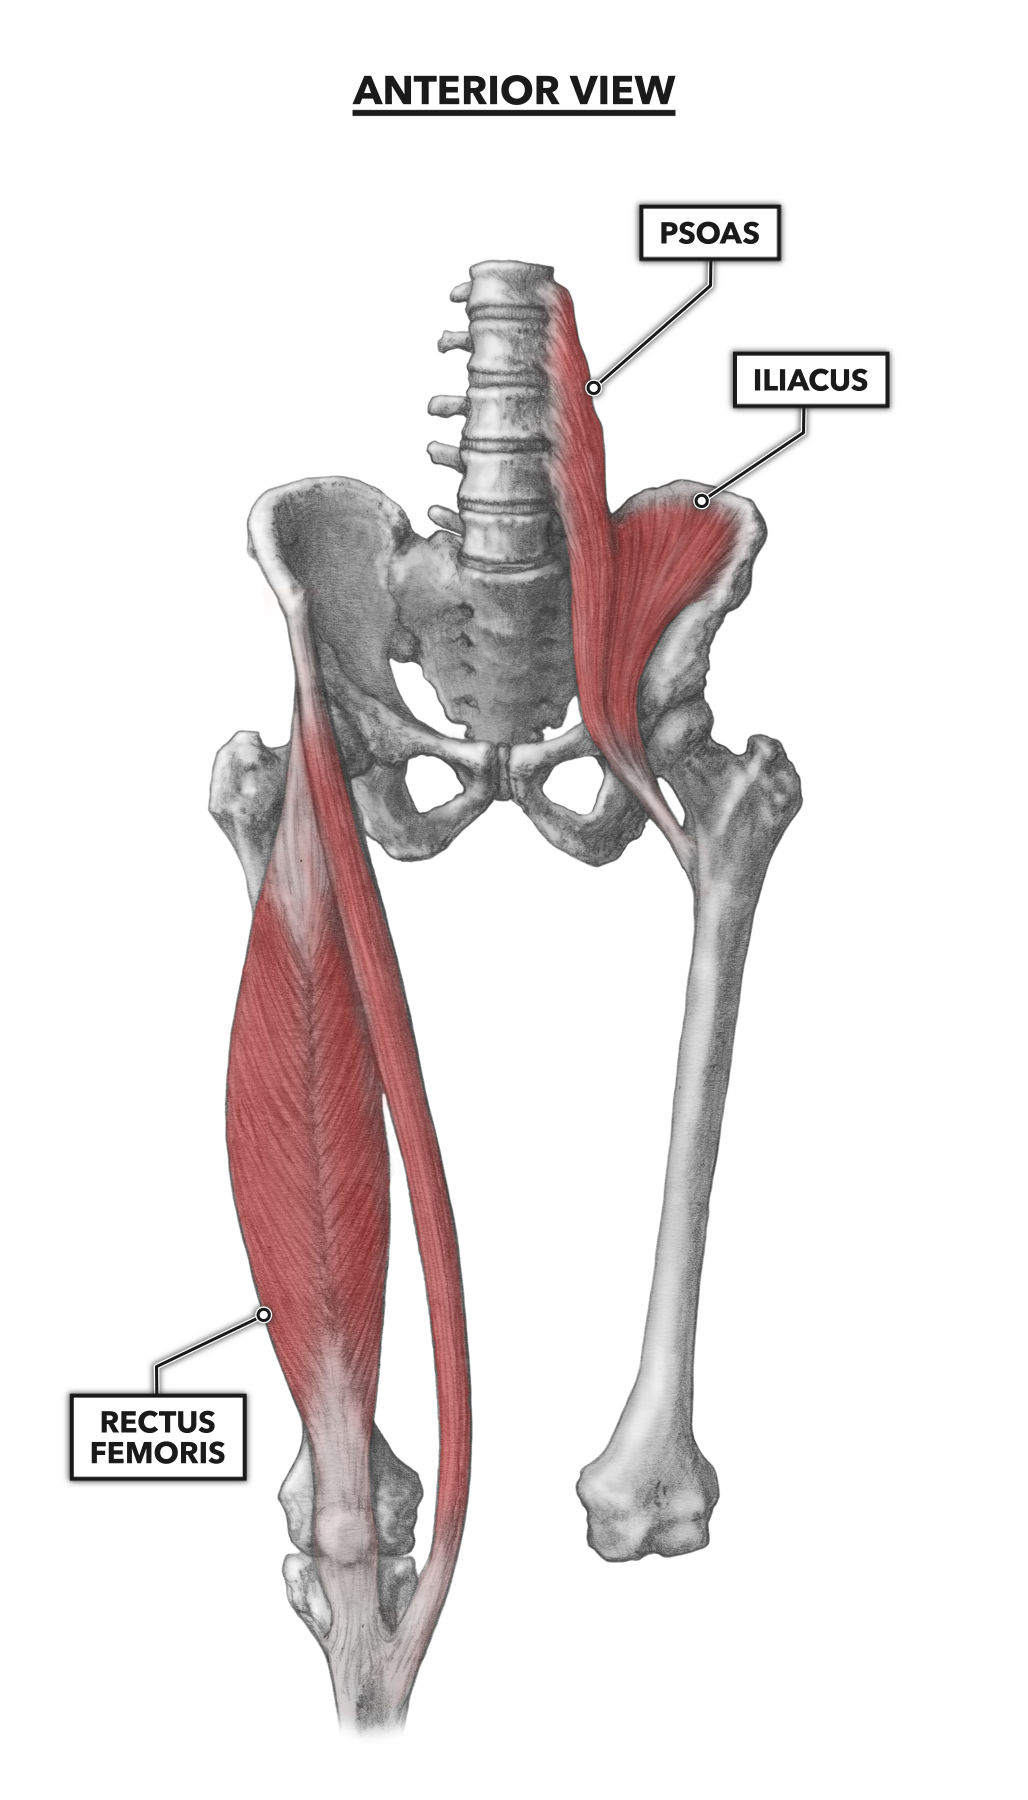 My CartHip Musculature, Part 1: Anterior Muscles